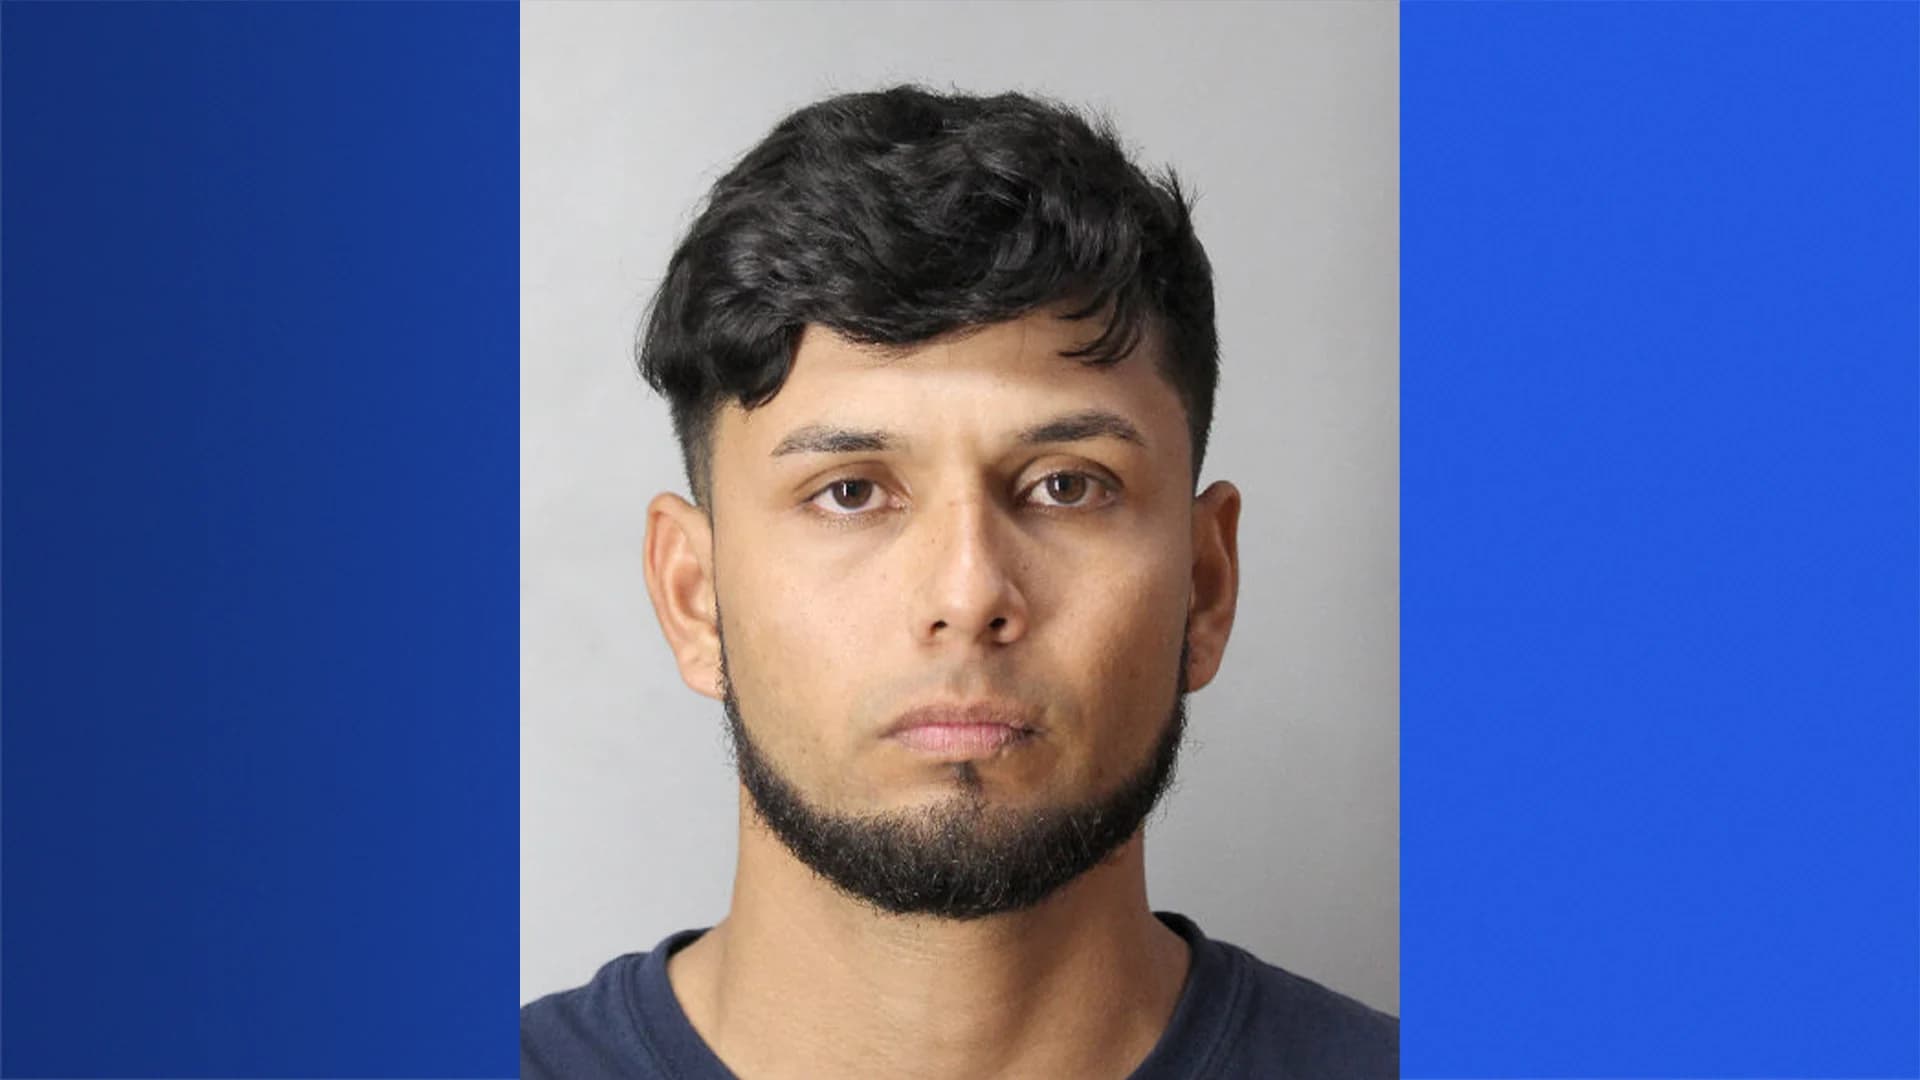 Officials: Bellerose Village man arrested for fatally stabbing man who attempted to steal wheel rims, tires from his car